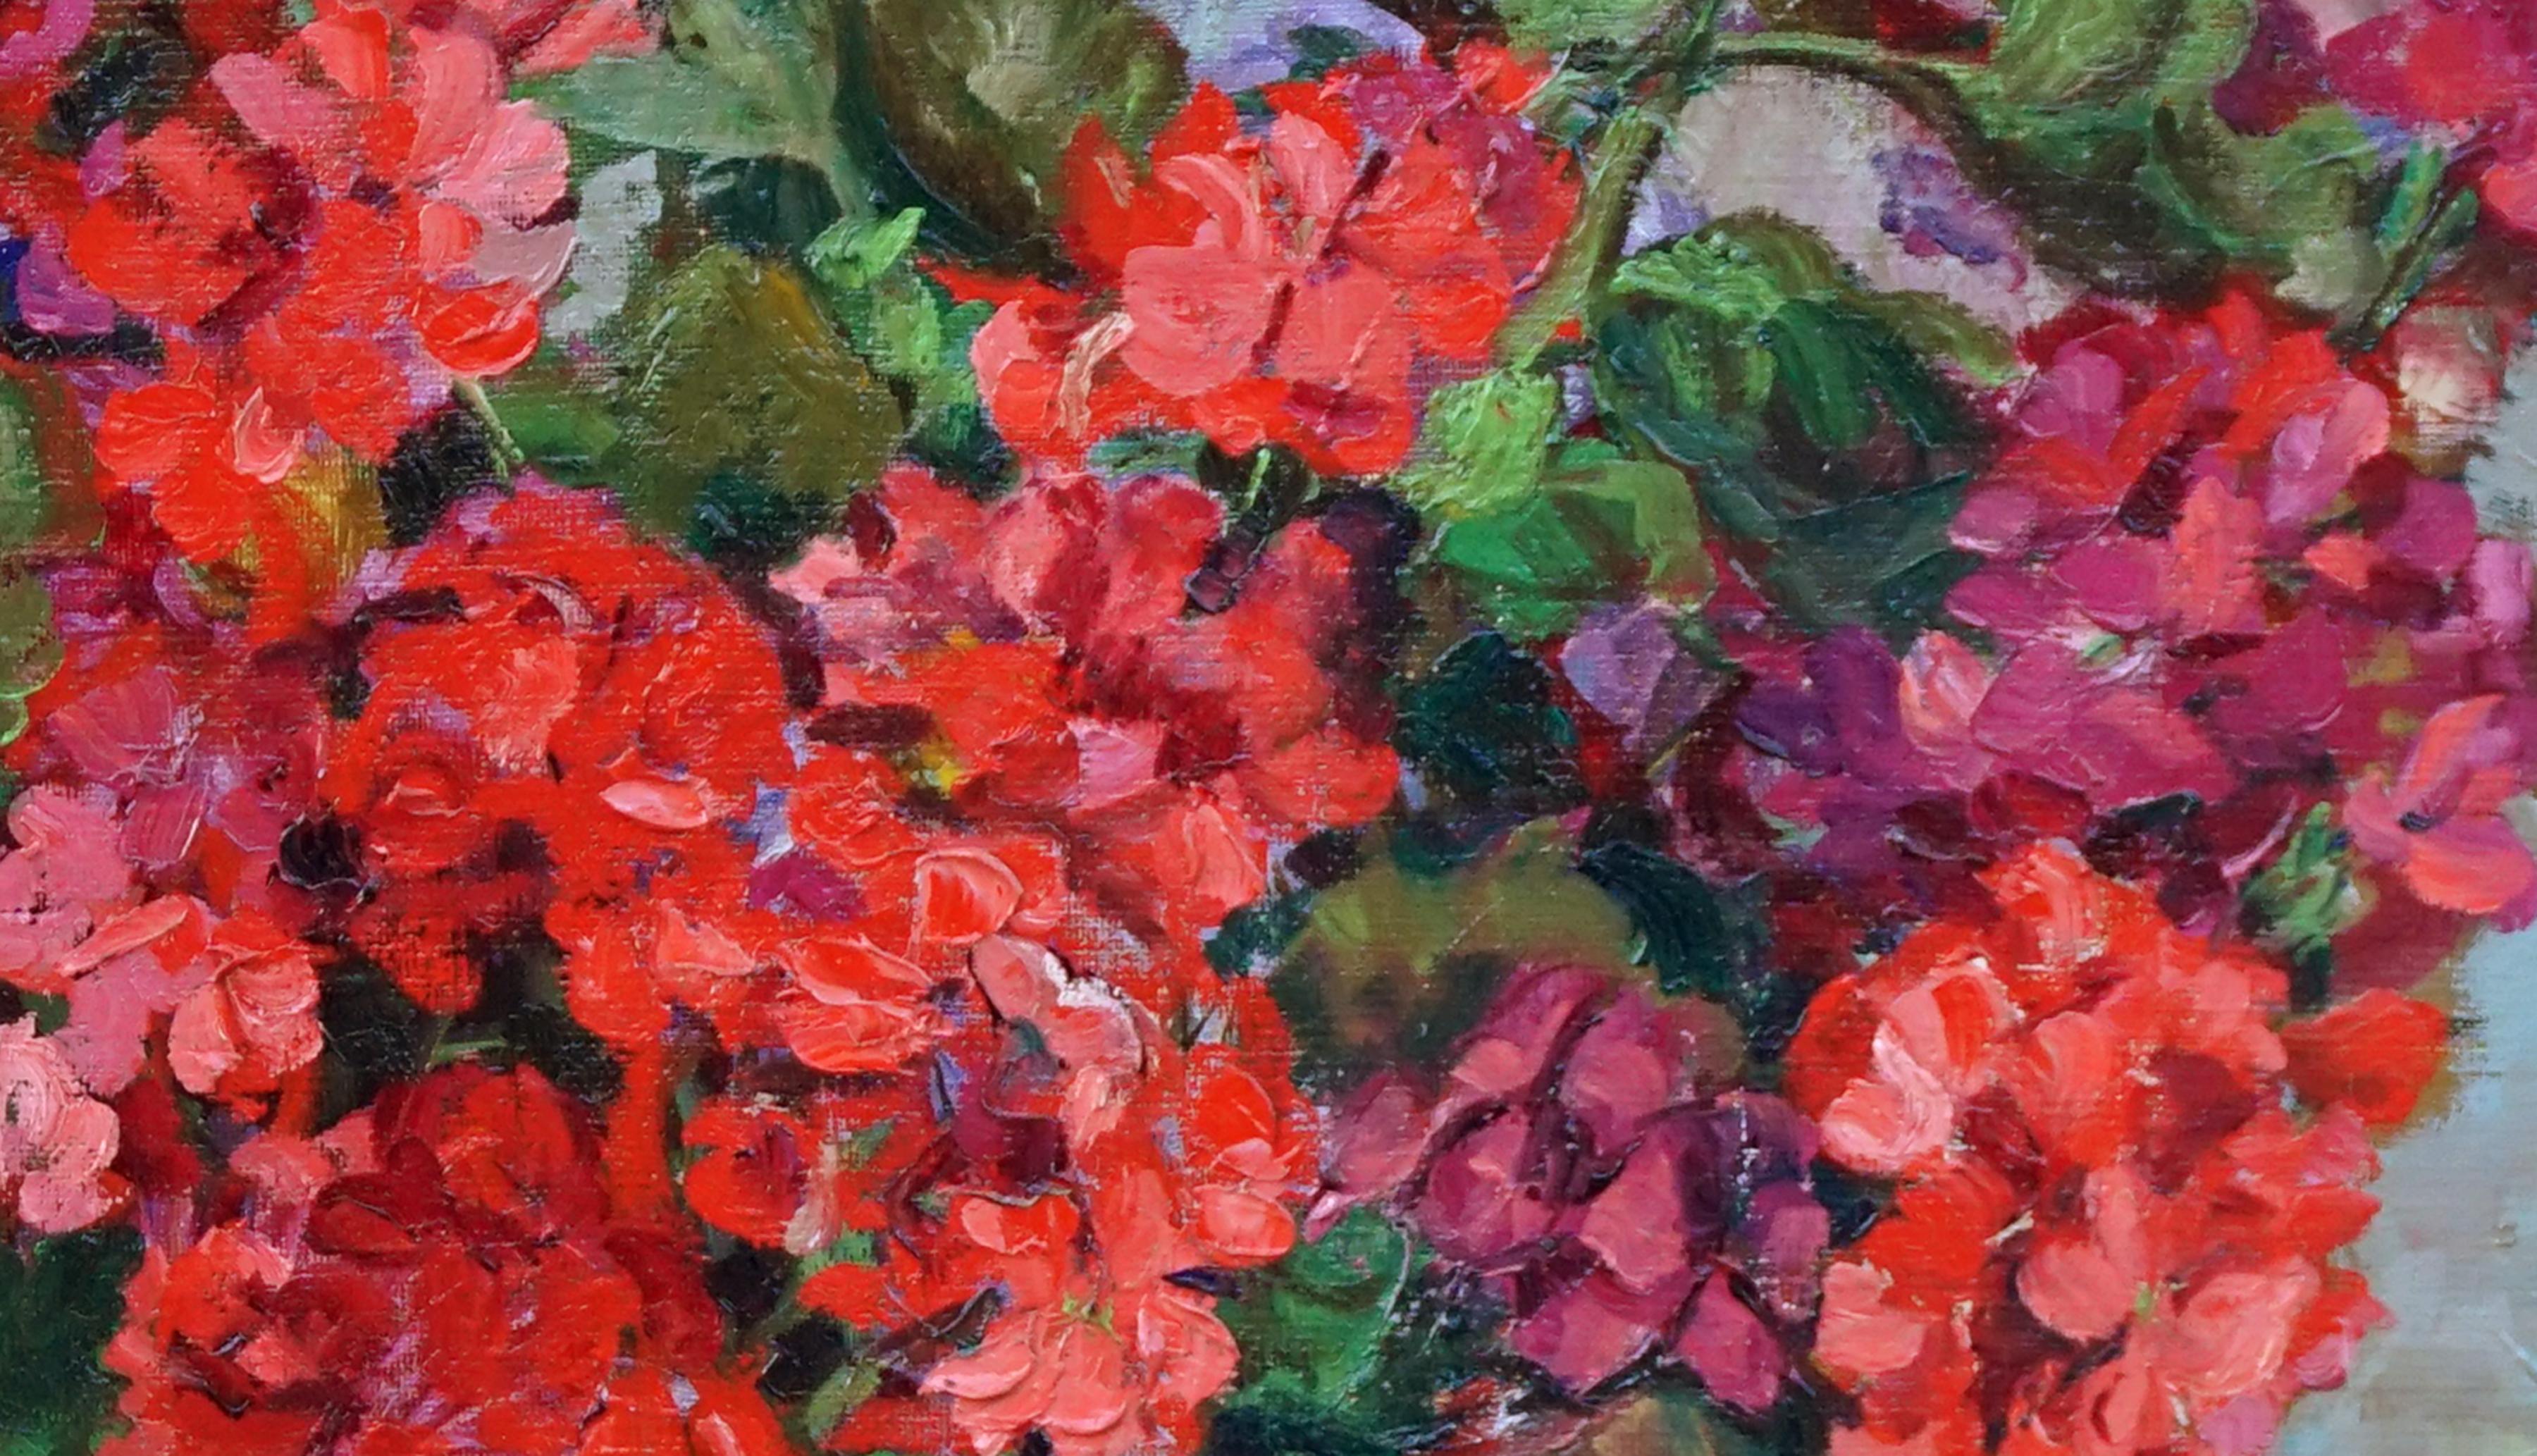 Red Geraniums in Copper Cache Pot w/Hall Water Pitcher - Painting by Helen Enoch Gleiforst